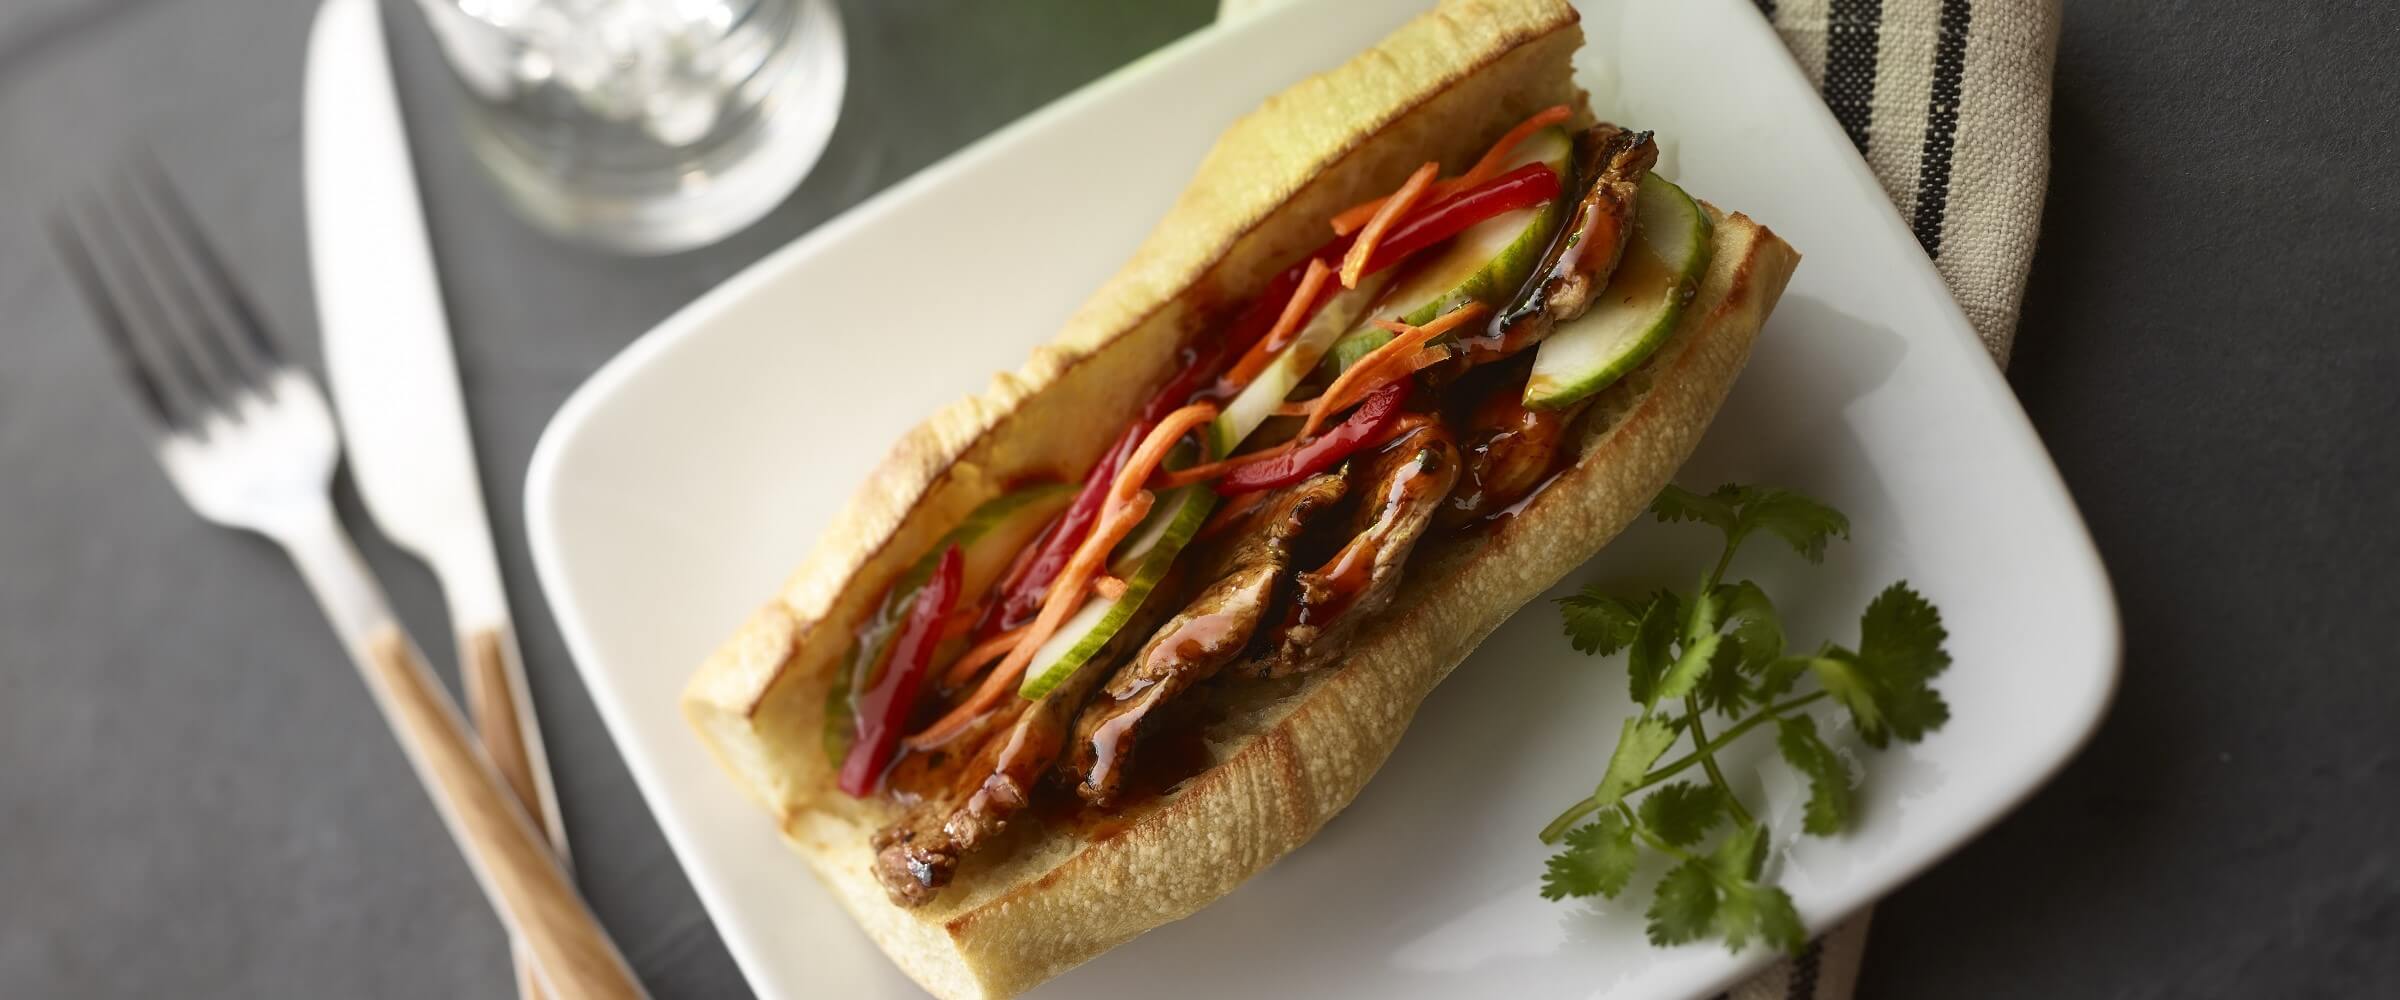 bahn mi sandwich with vegetables on white plate with garnish